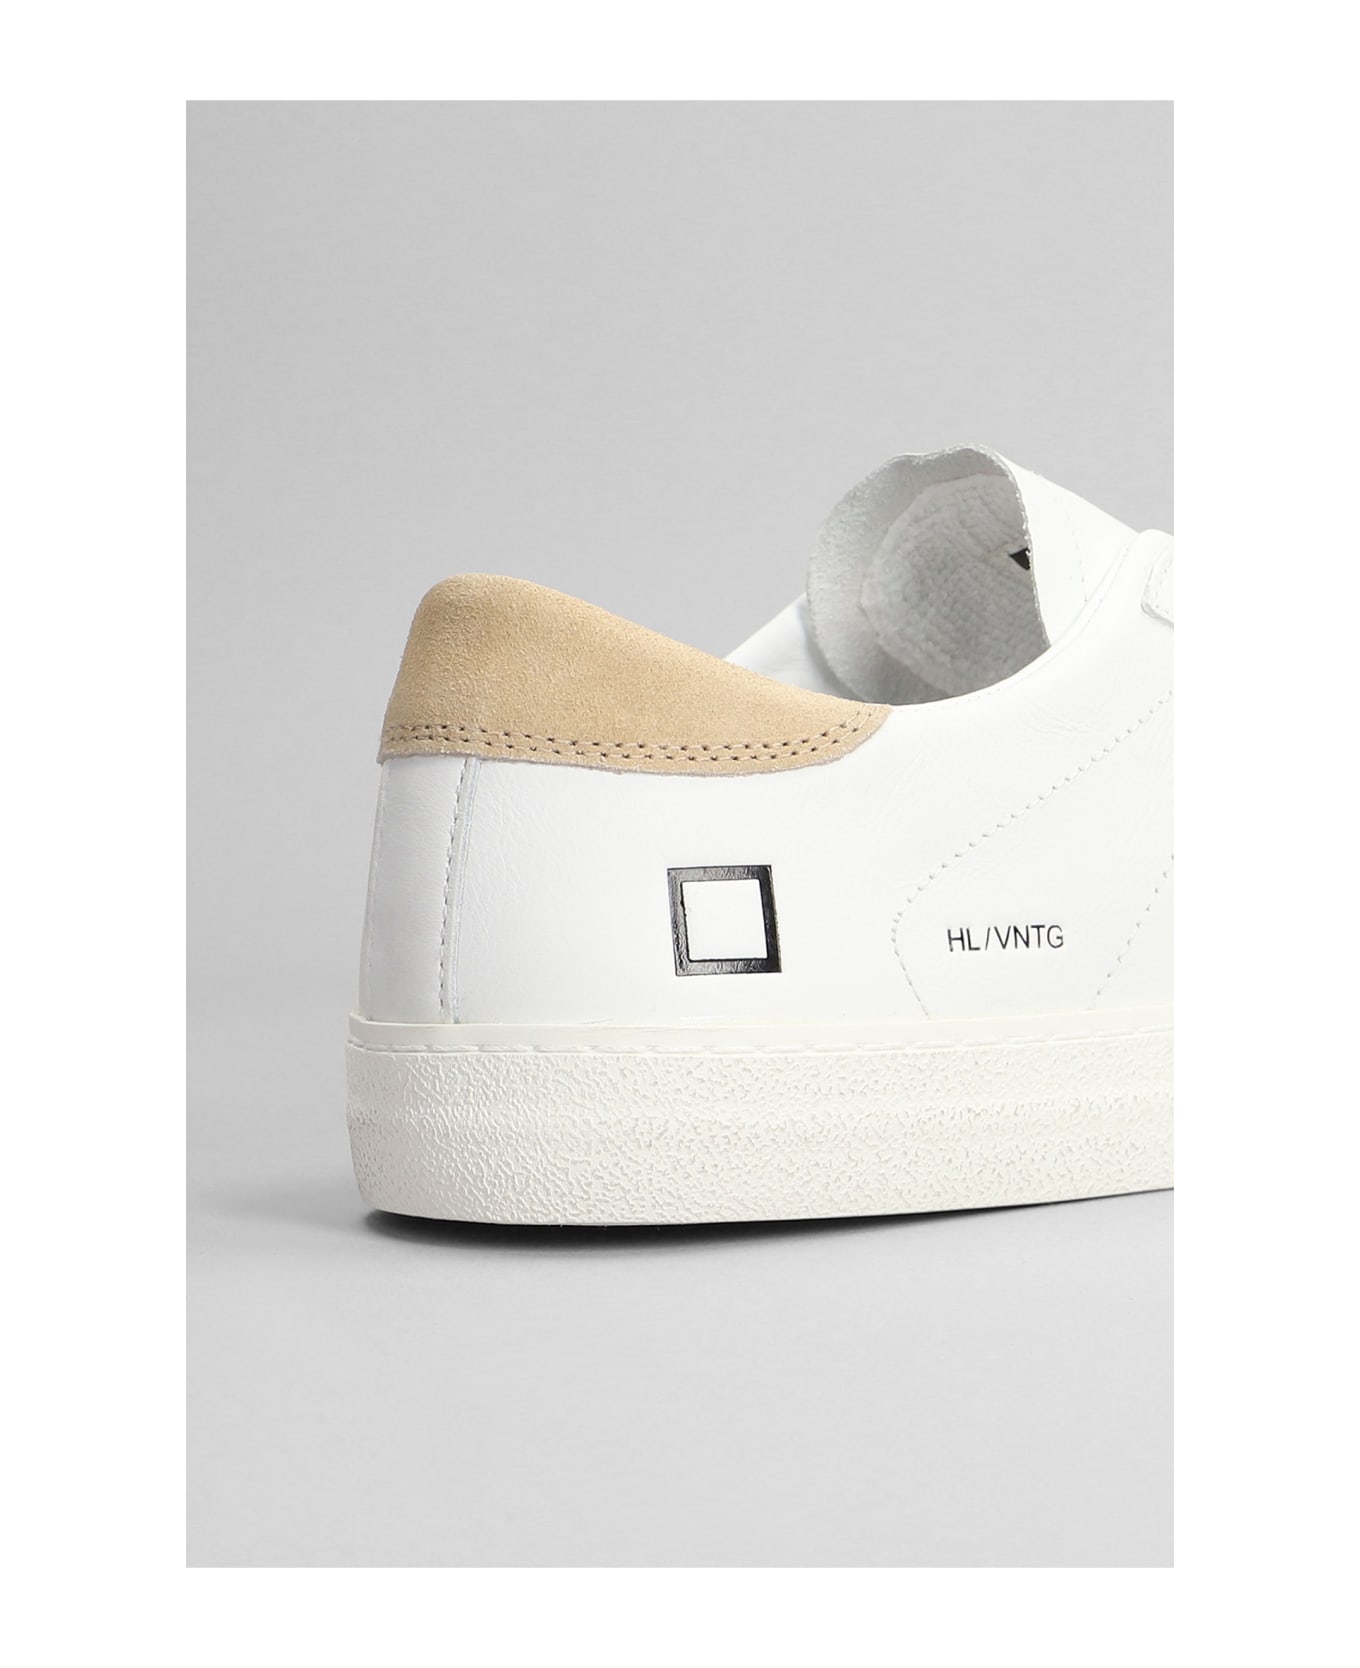 D.A.T.E. Hill Low Sneakers In White Leather D.A.T.E. - WHITE